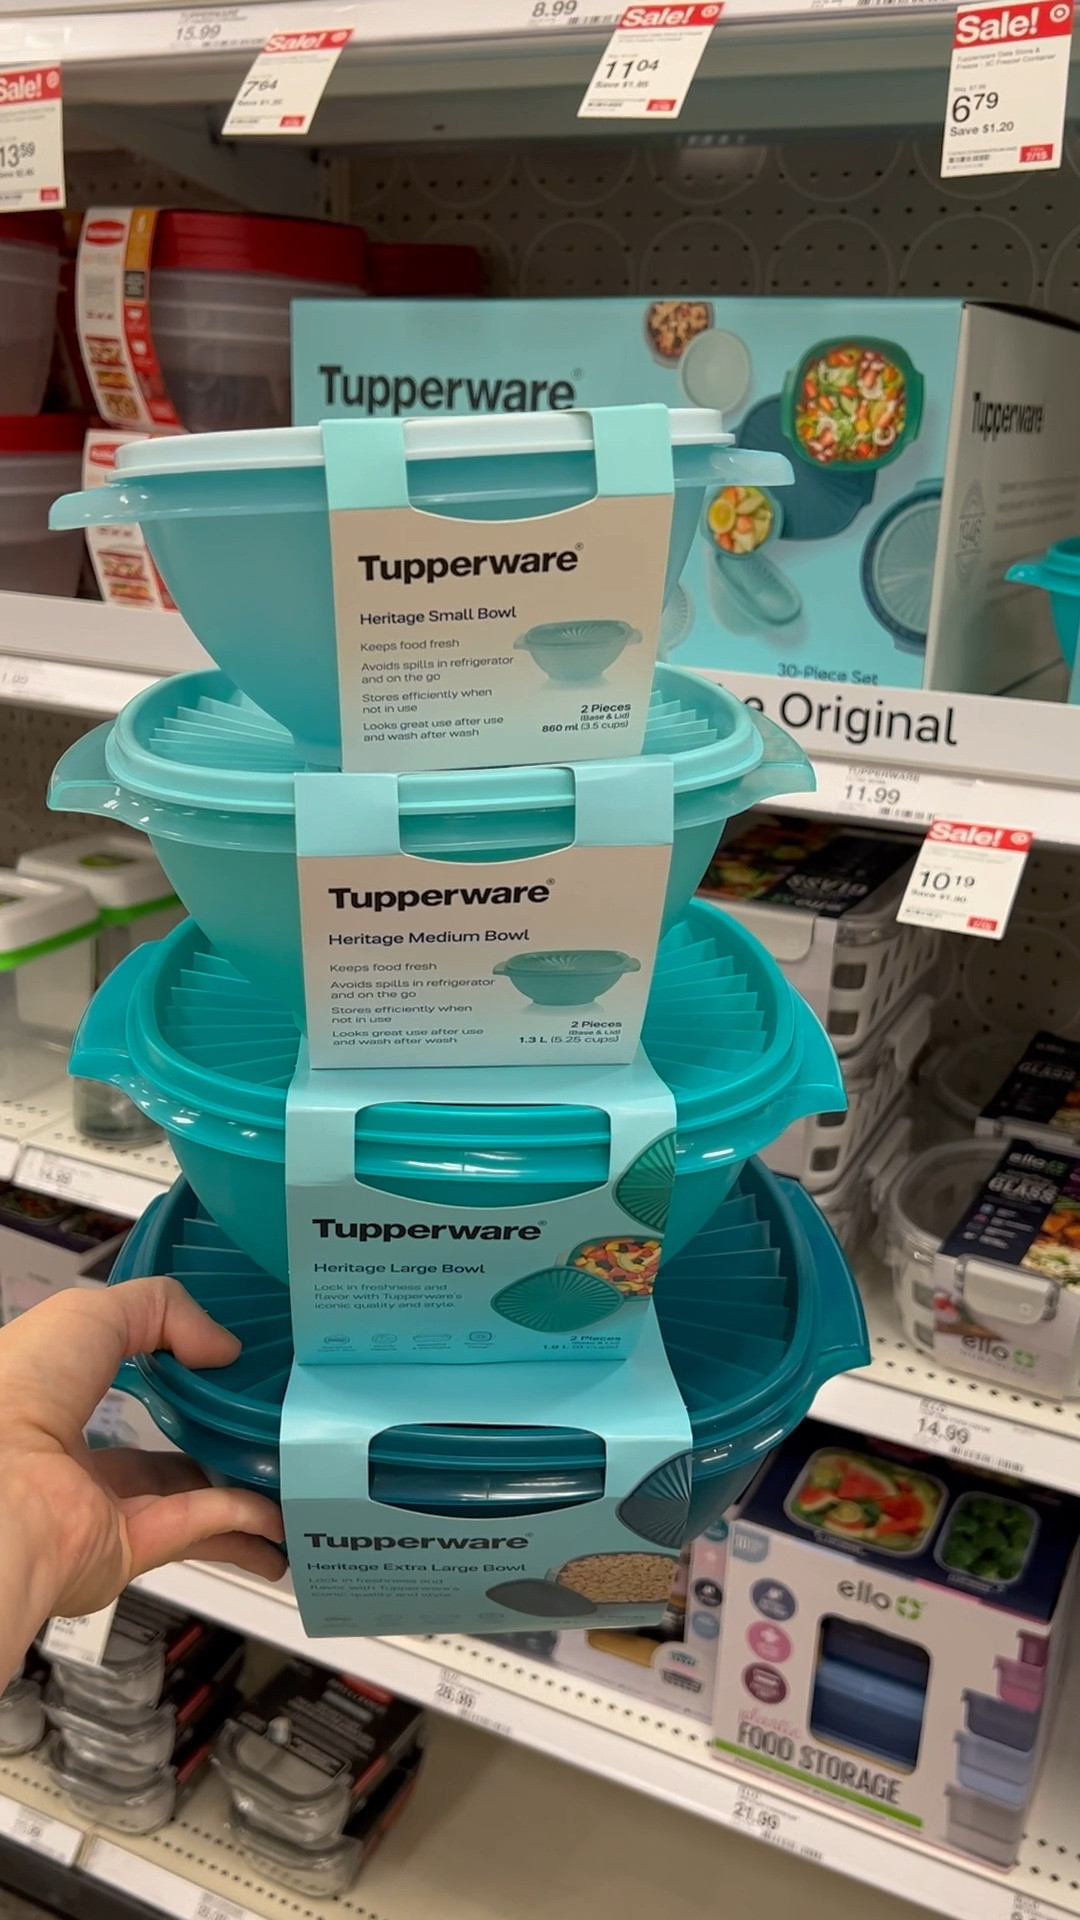 Tupperware Store Serve & Go - 5.75C Round Divided Food Container